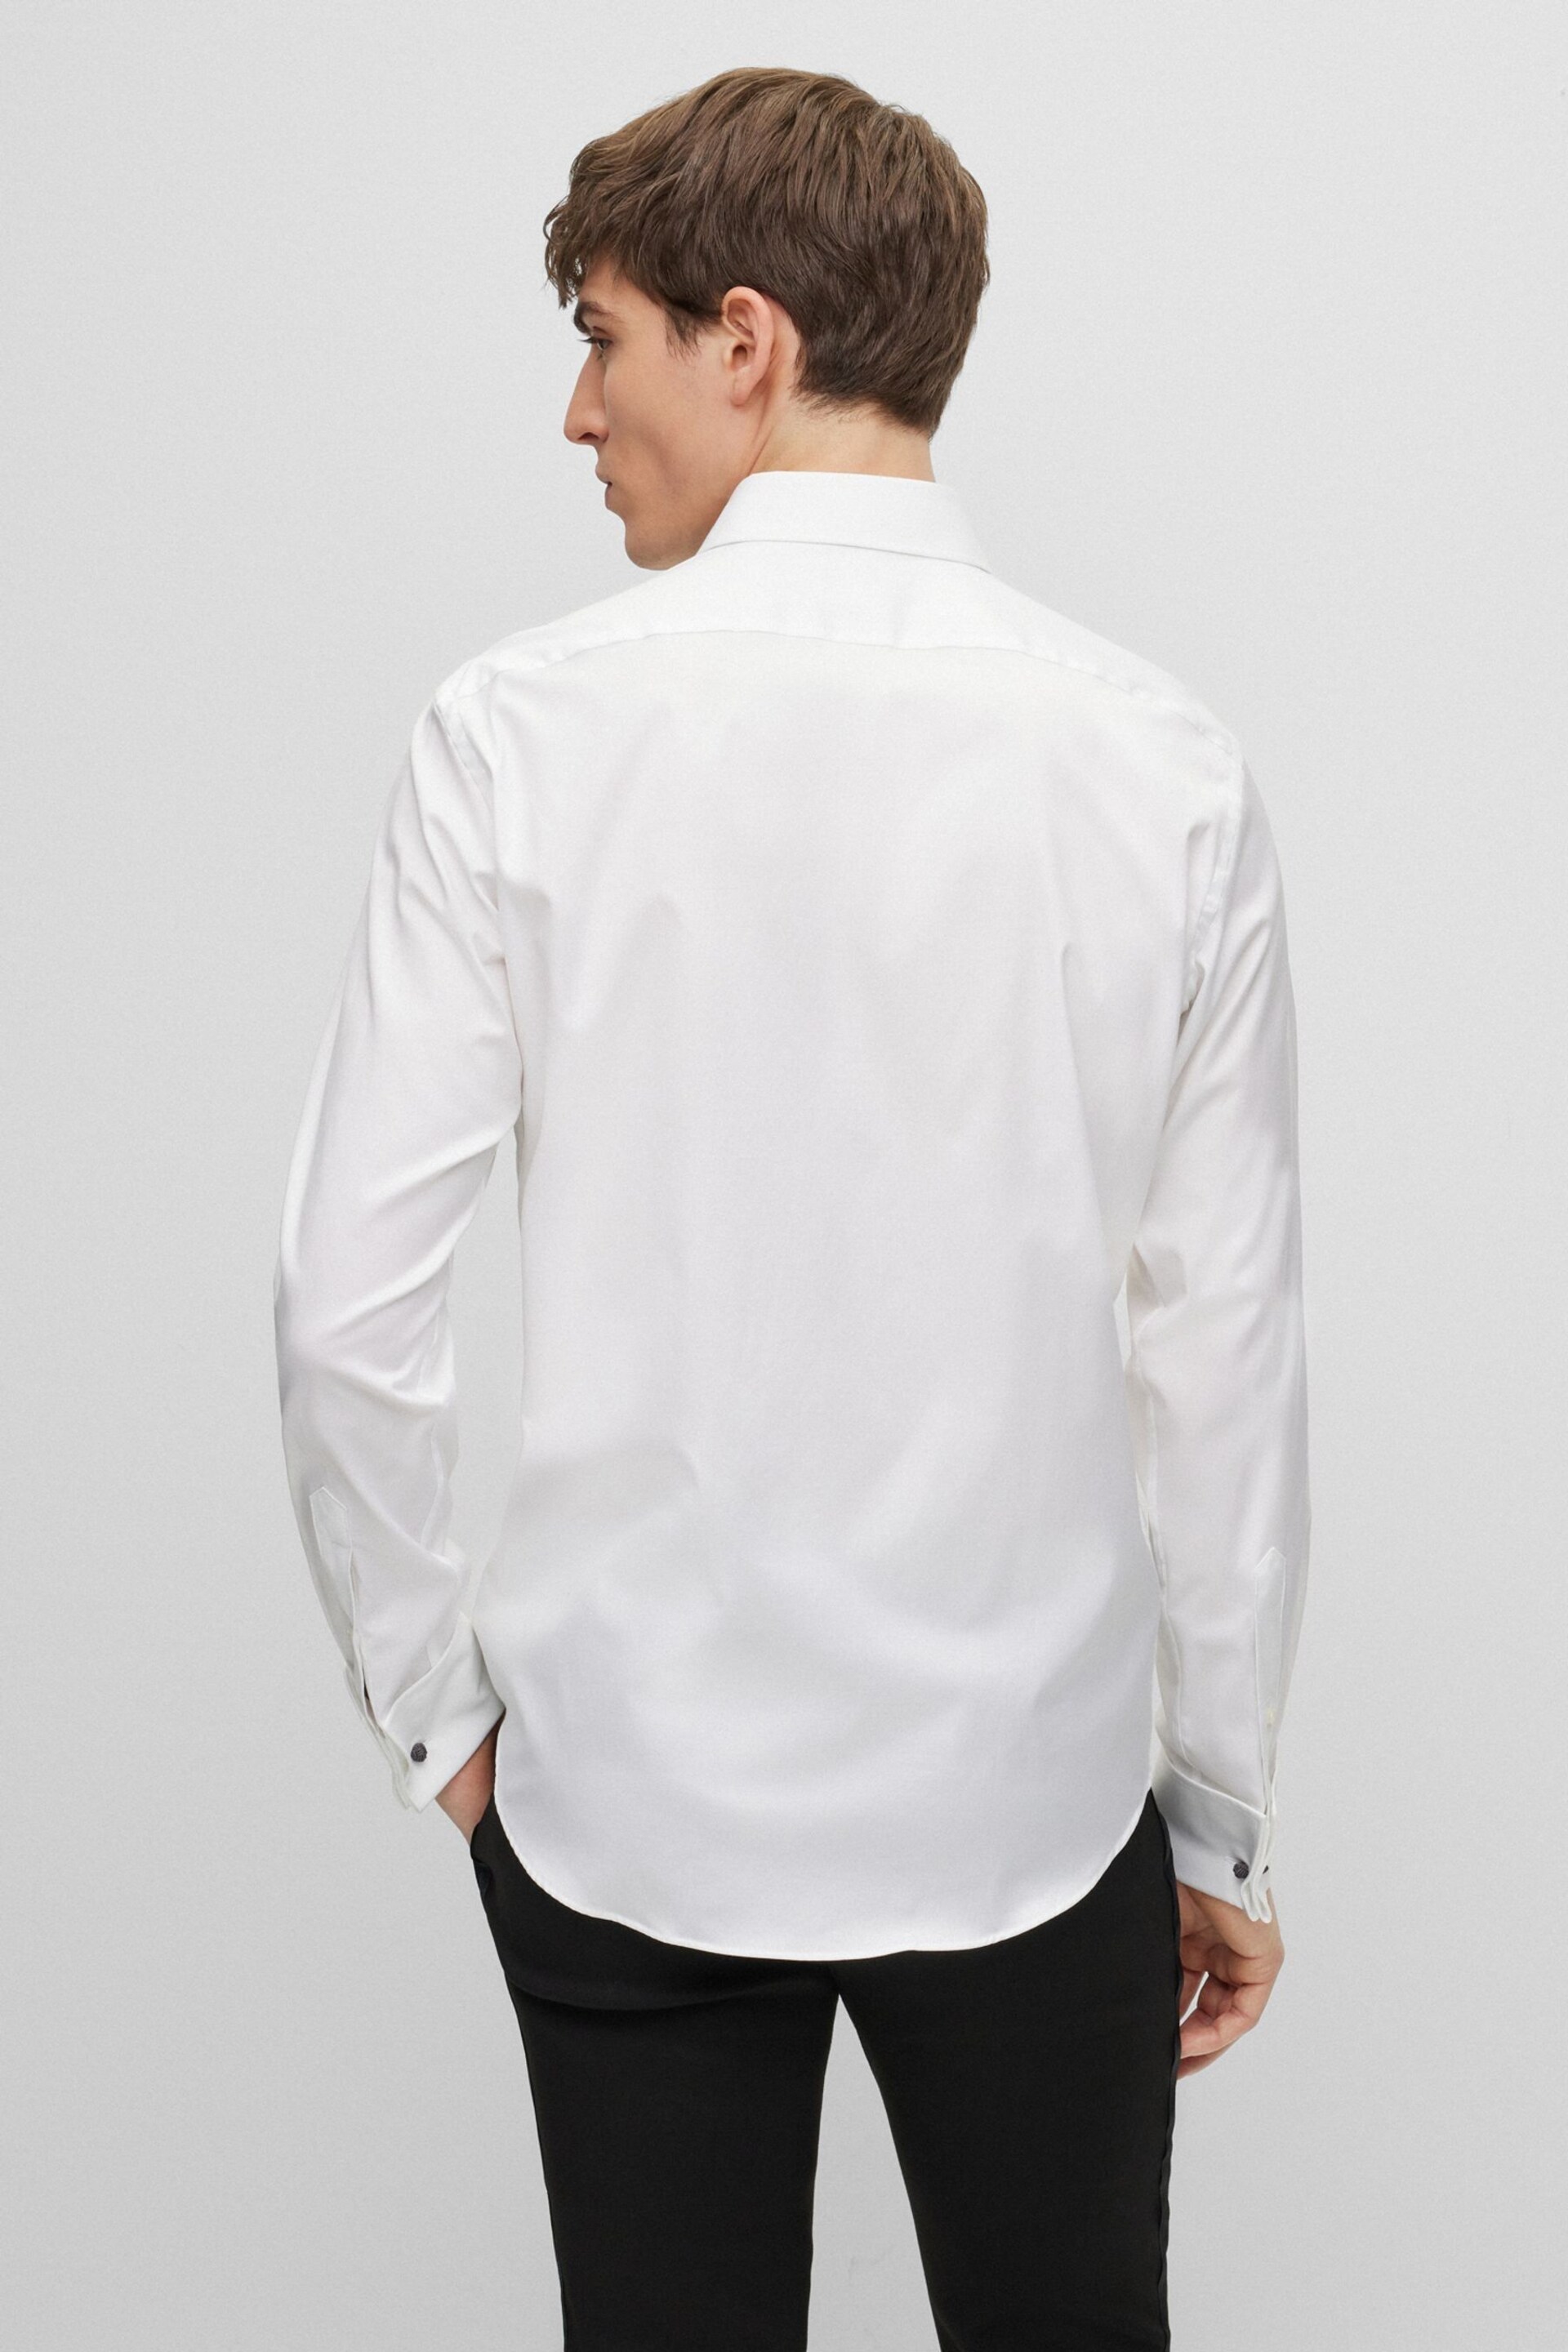 BOSS White Regular Fit Double Cuff Long Sleeve Shirt - Image 2 of 6